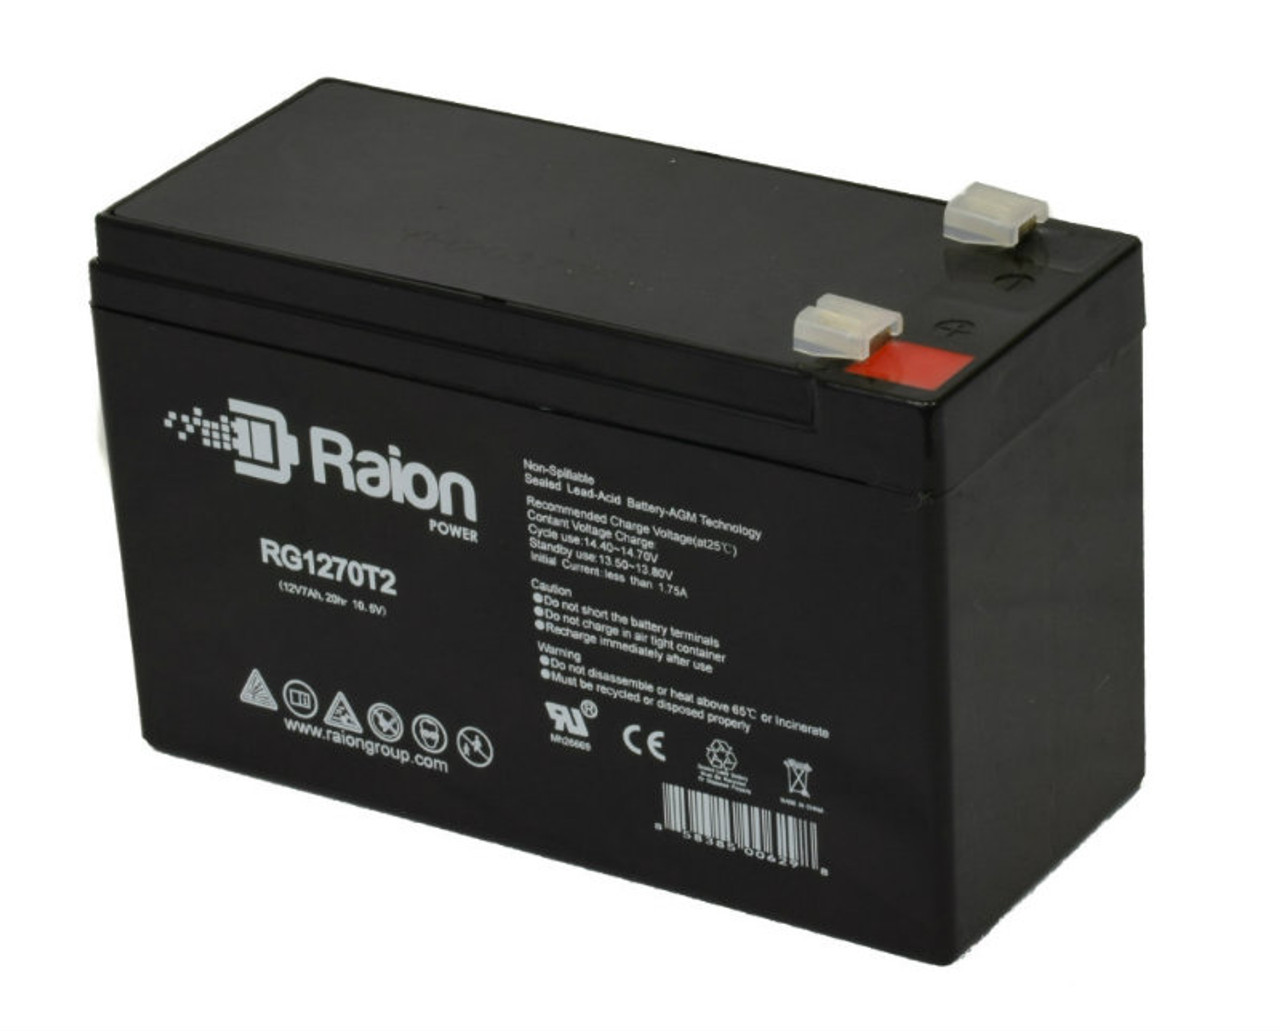 Raion Power Replacement 12V 7Ah RG1270T1 Fire Alarm Battery for Altronix SMP3PMCTXPD16